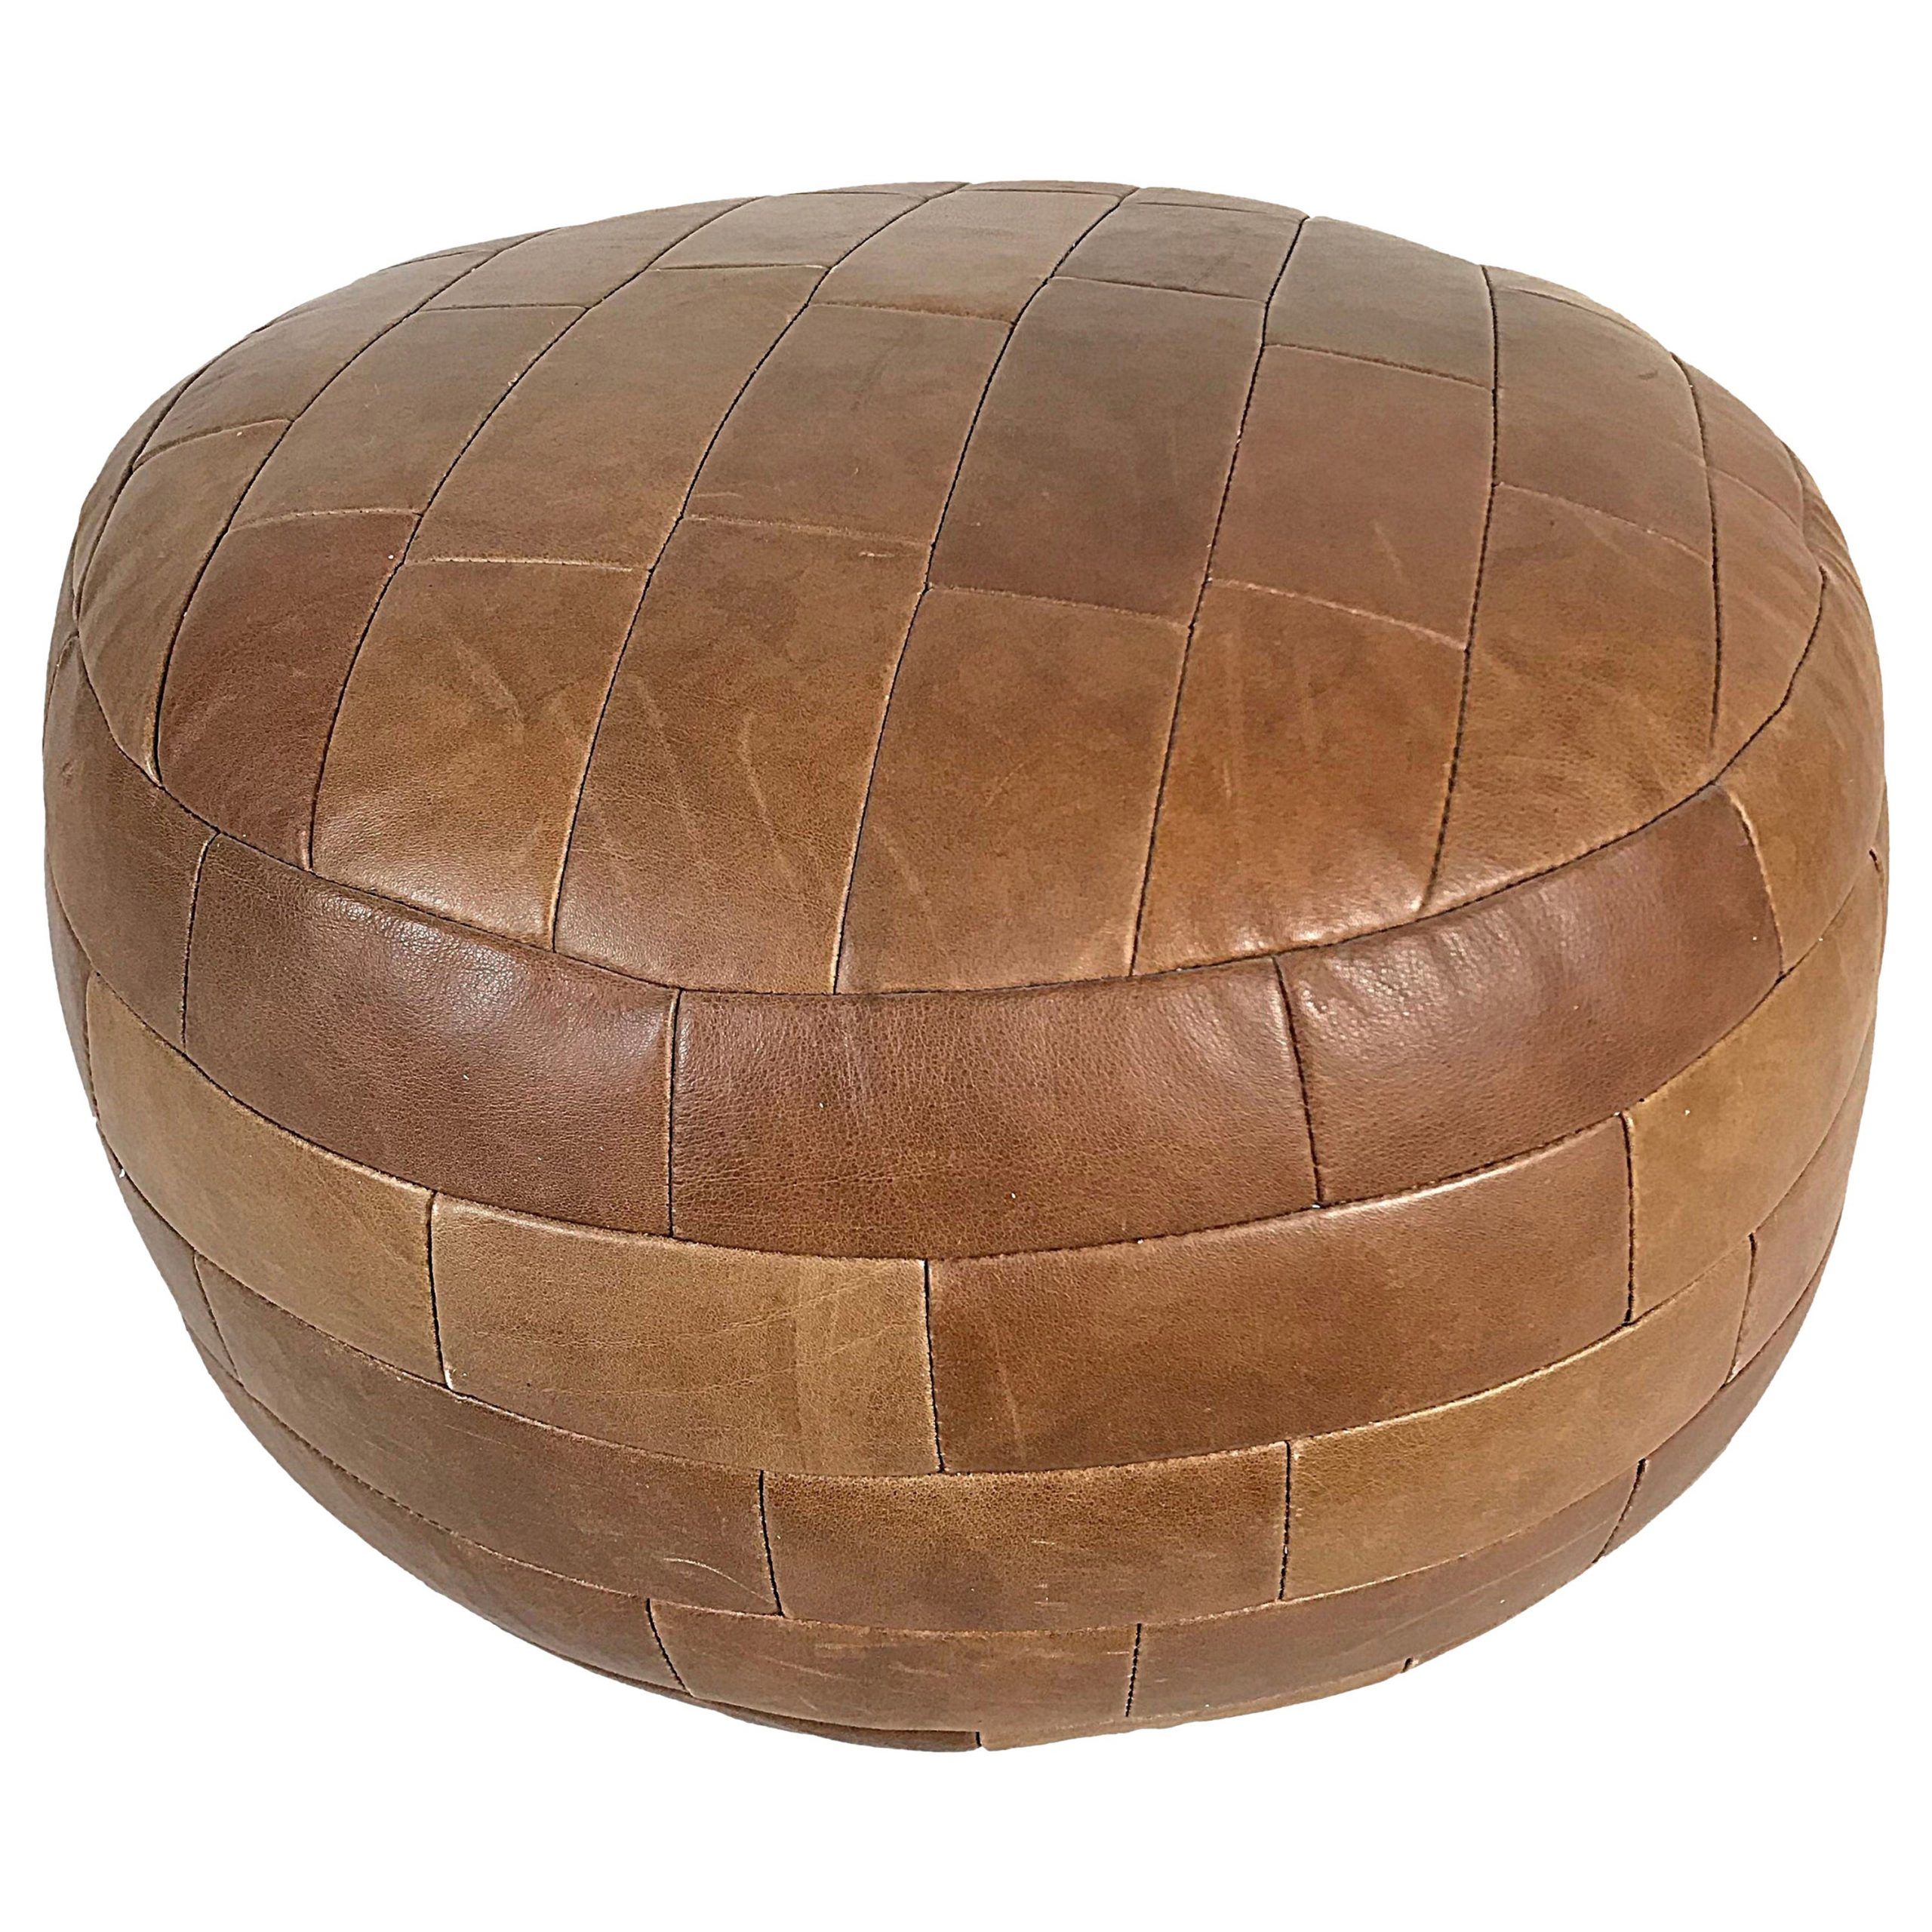 Vintage Grey Leather Pouf /ottoman At 1stdibs With Regard To Medium Gray Leather Pouf Ottomans (View 2 of 20)